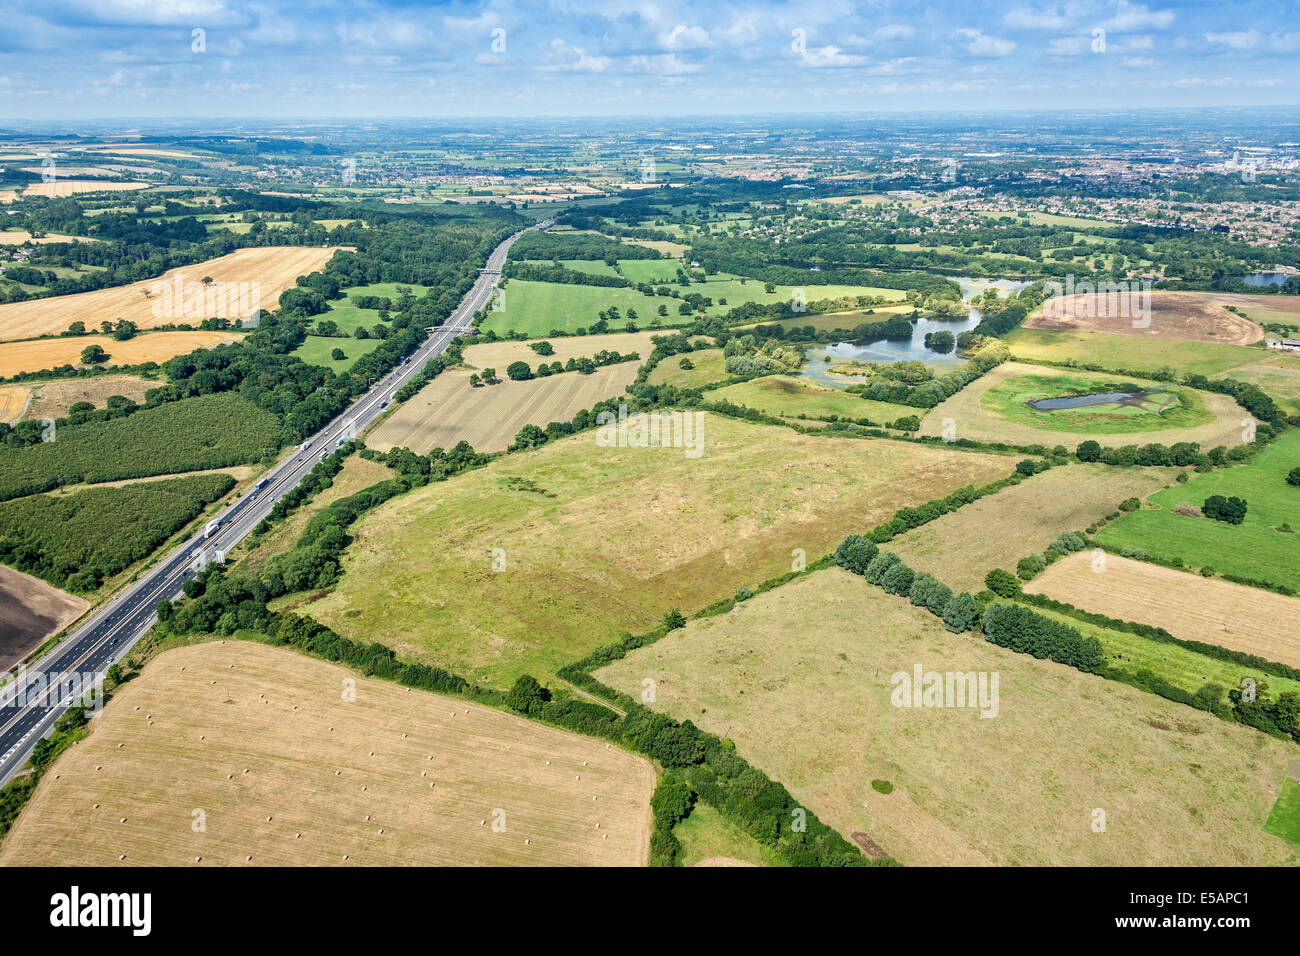 Aerial view of Coate Water Country Park and M4 Motorway left looking towards Swindon Wiltshire, UK. JMH6221 Stock Photo